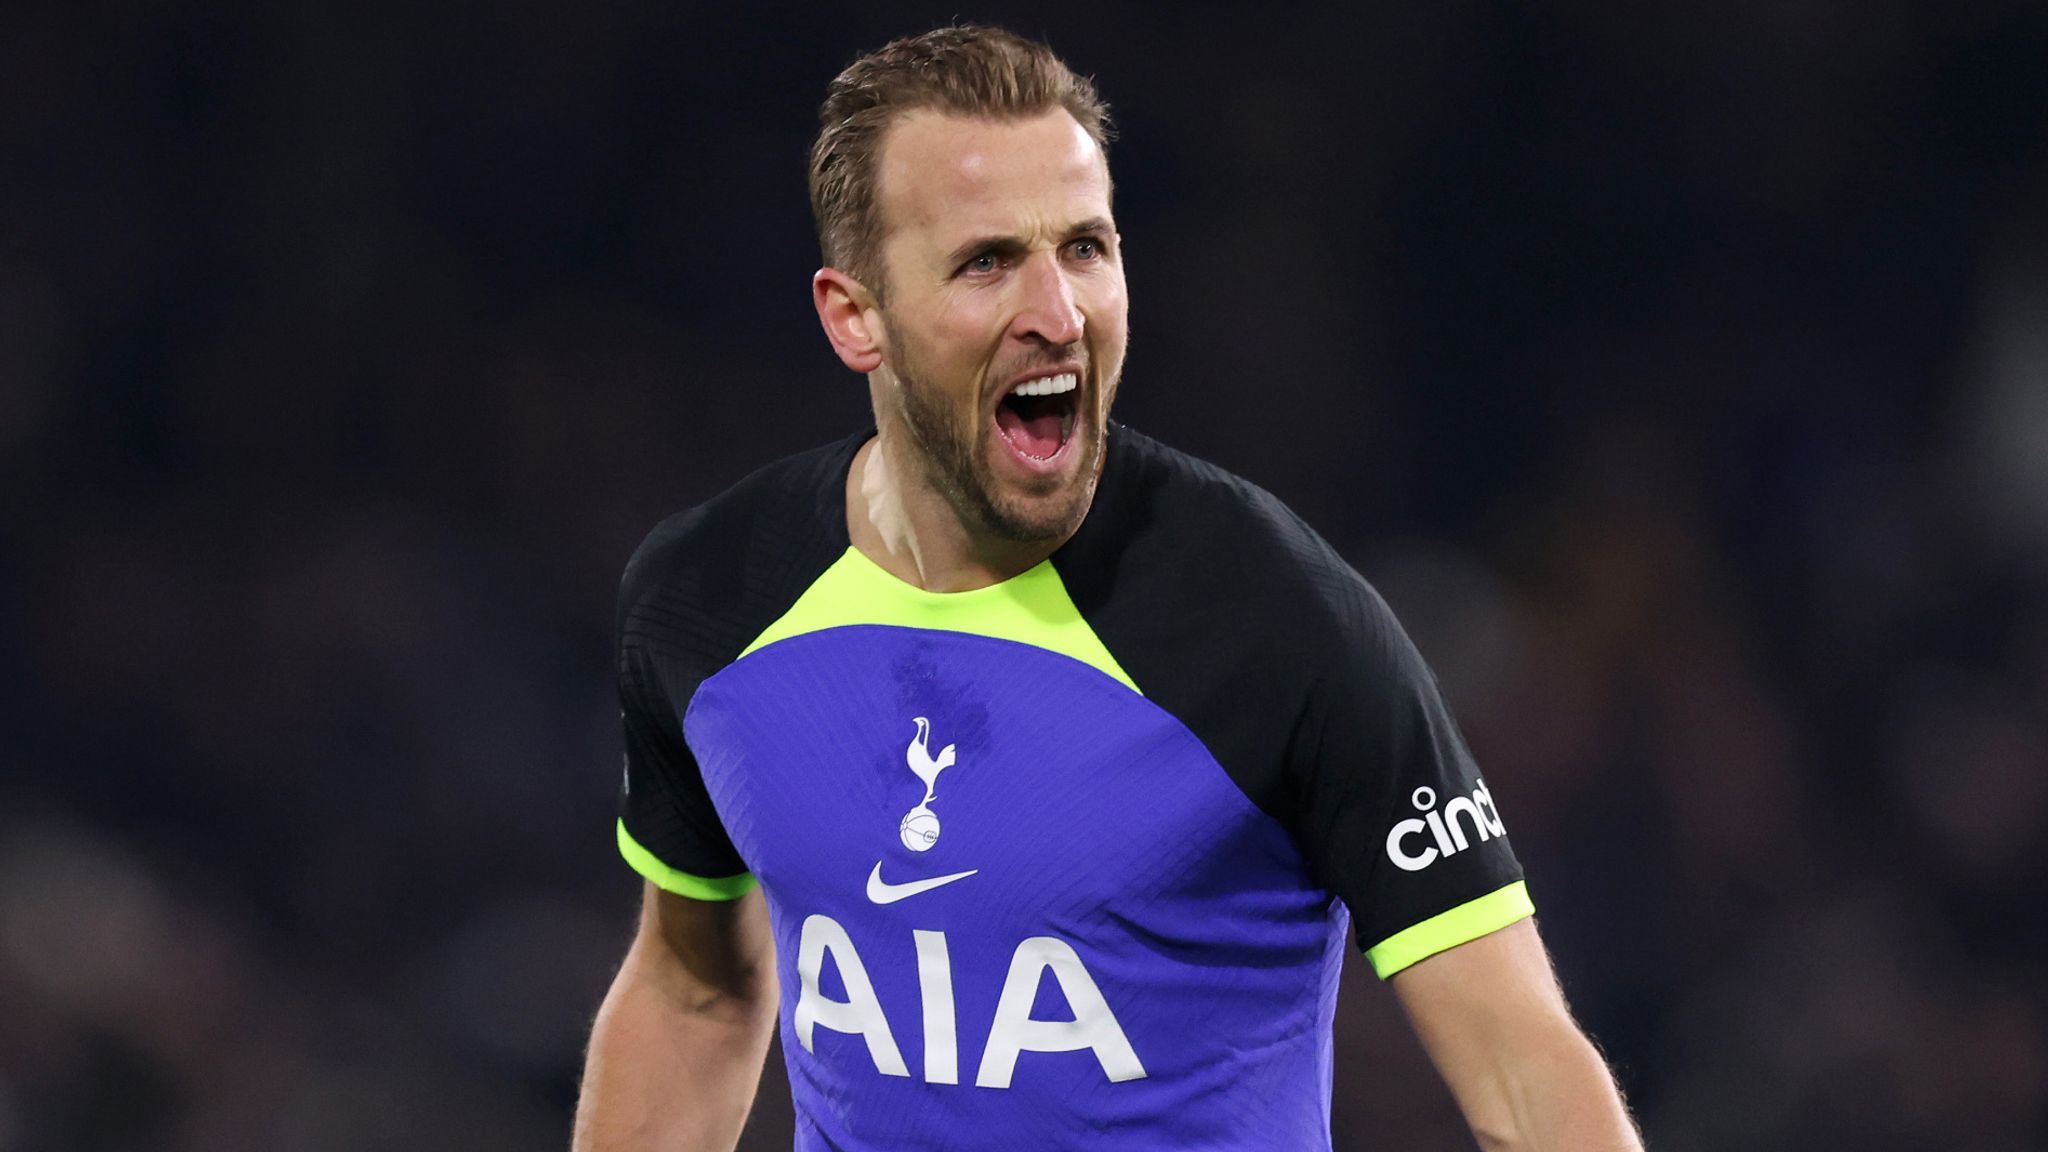 Tottenham 2-1 Fulham: Spurs rise to second place with Kane & Hojbjerg  scoring